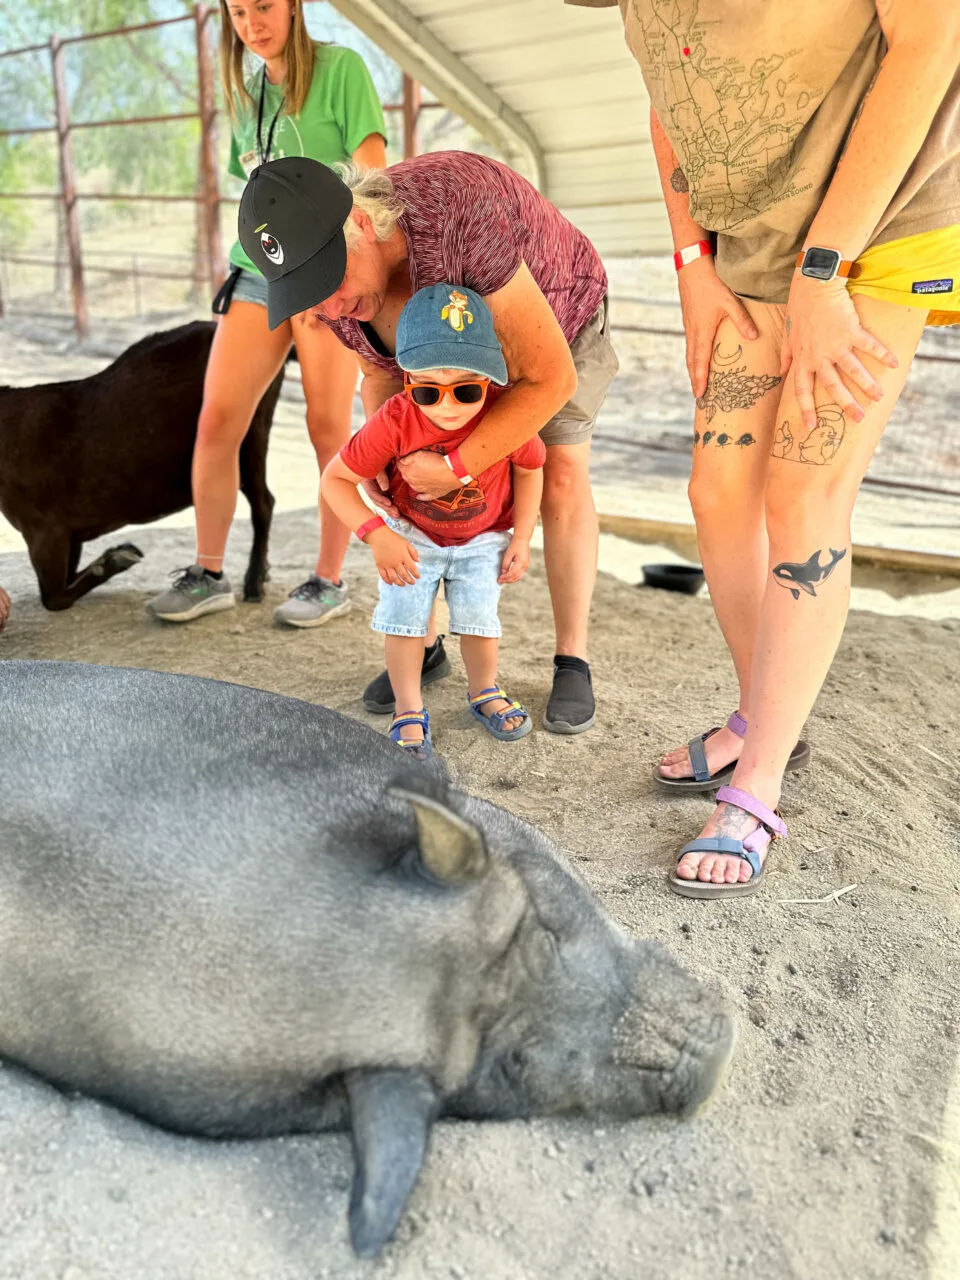 Visitors are encourage to touch, pet, and learn all about the animals at the Gentle Barn in California.